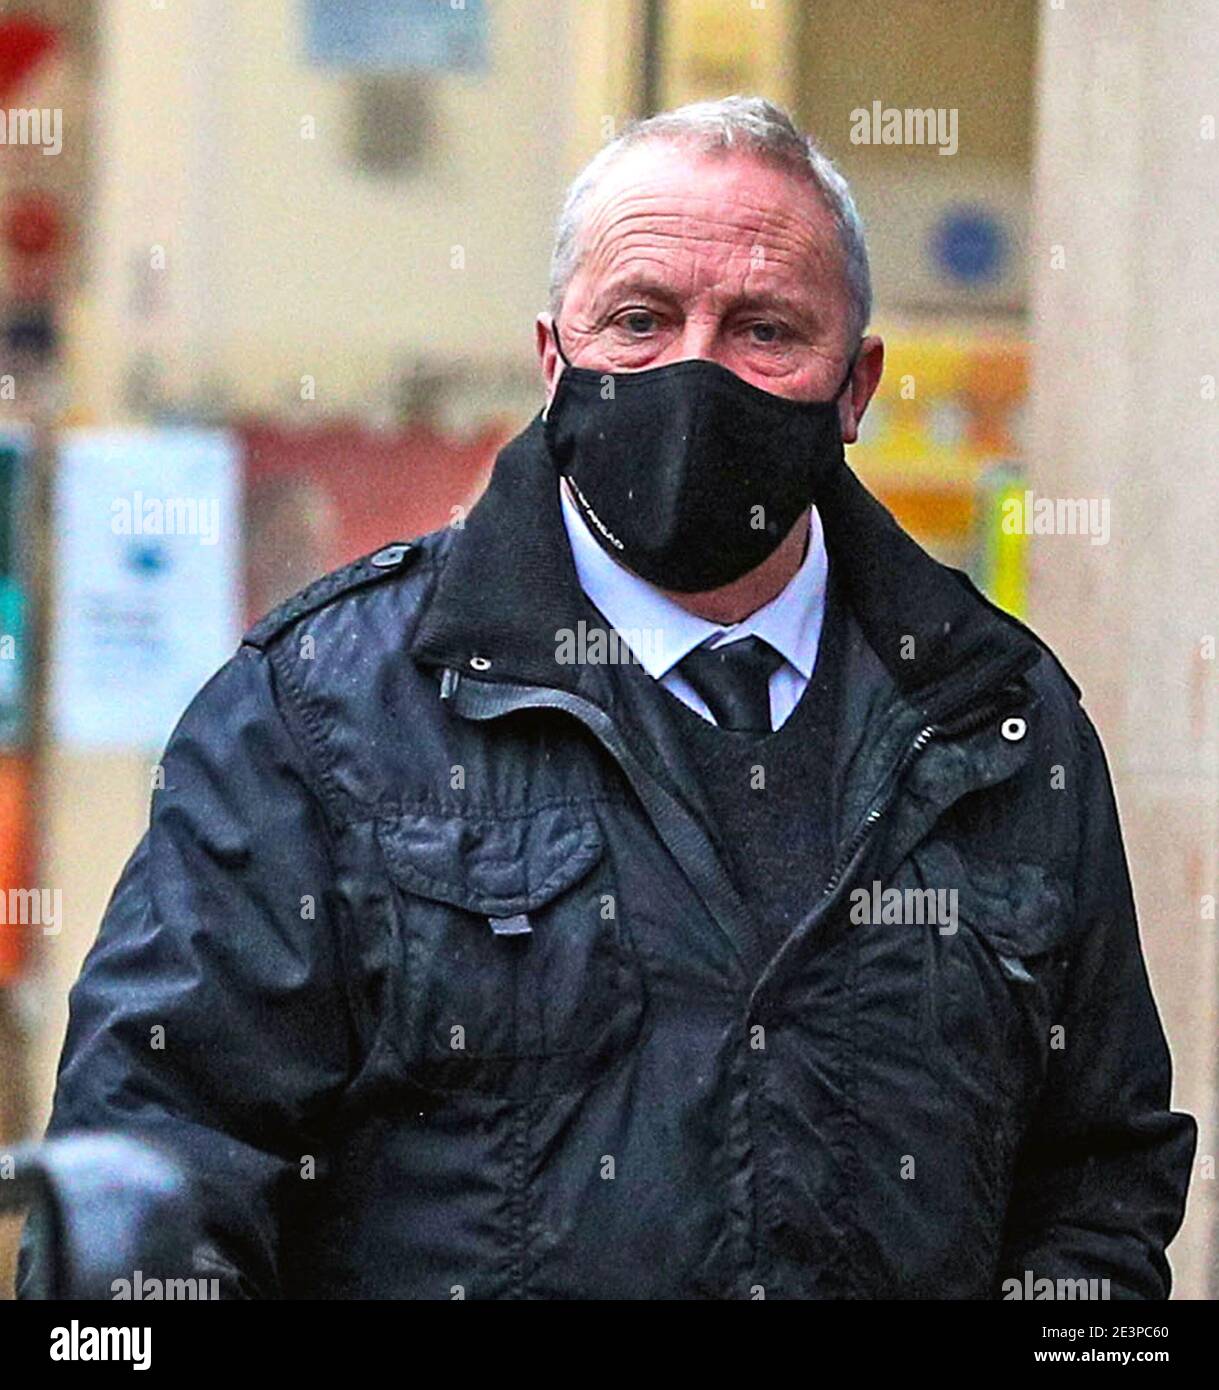 George Boden the owner of Wood Flour Mill in Bosley arrives at Chester Town Hall. Boden is charged with four counts of gross negligence manslaughter after the death of four employees in an explosion at the mill on July 17 2015. Picture date: Wednesday January 20, 2021. Stock Photo